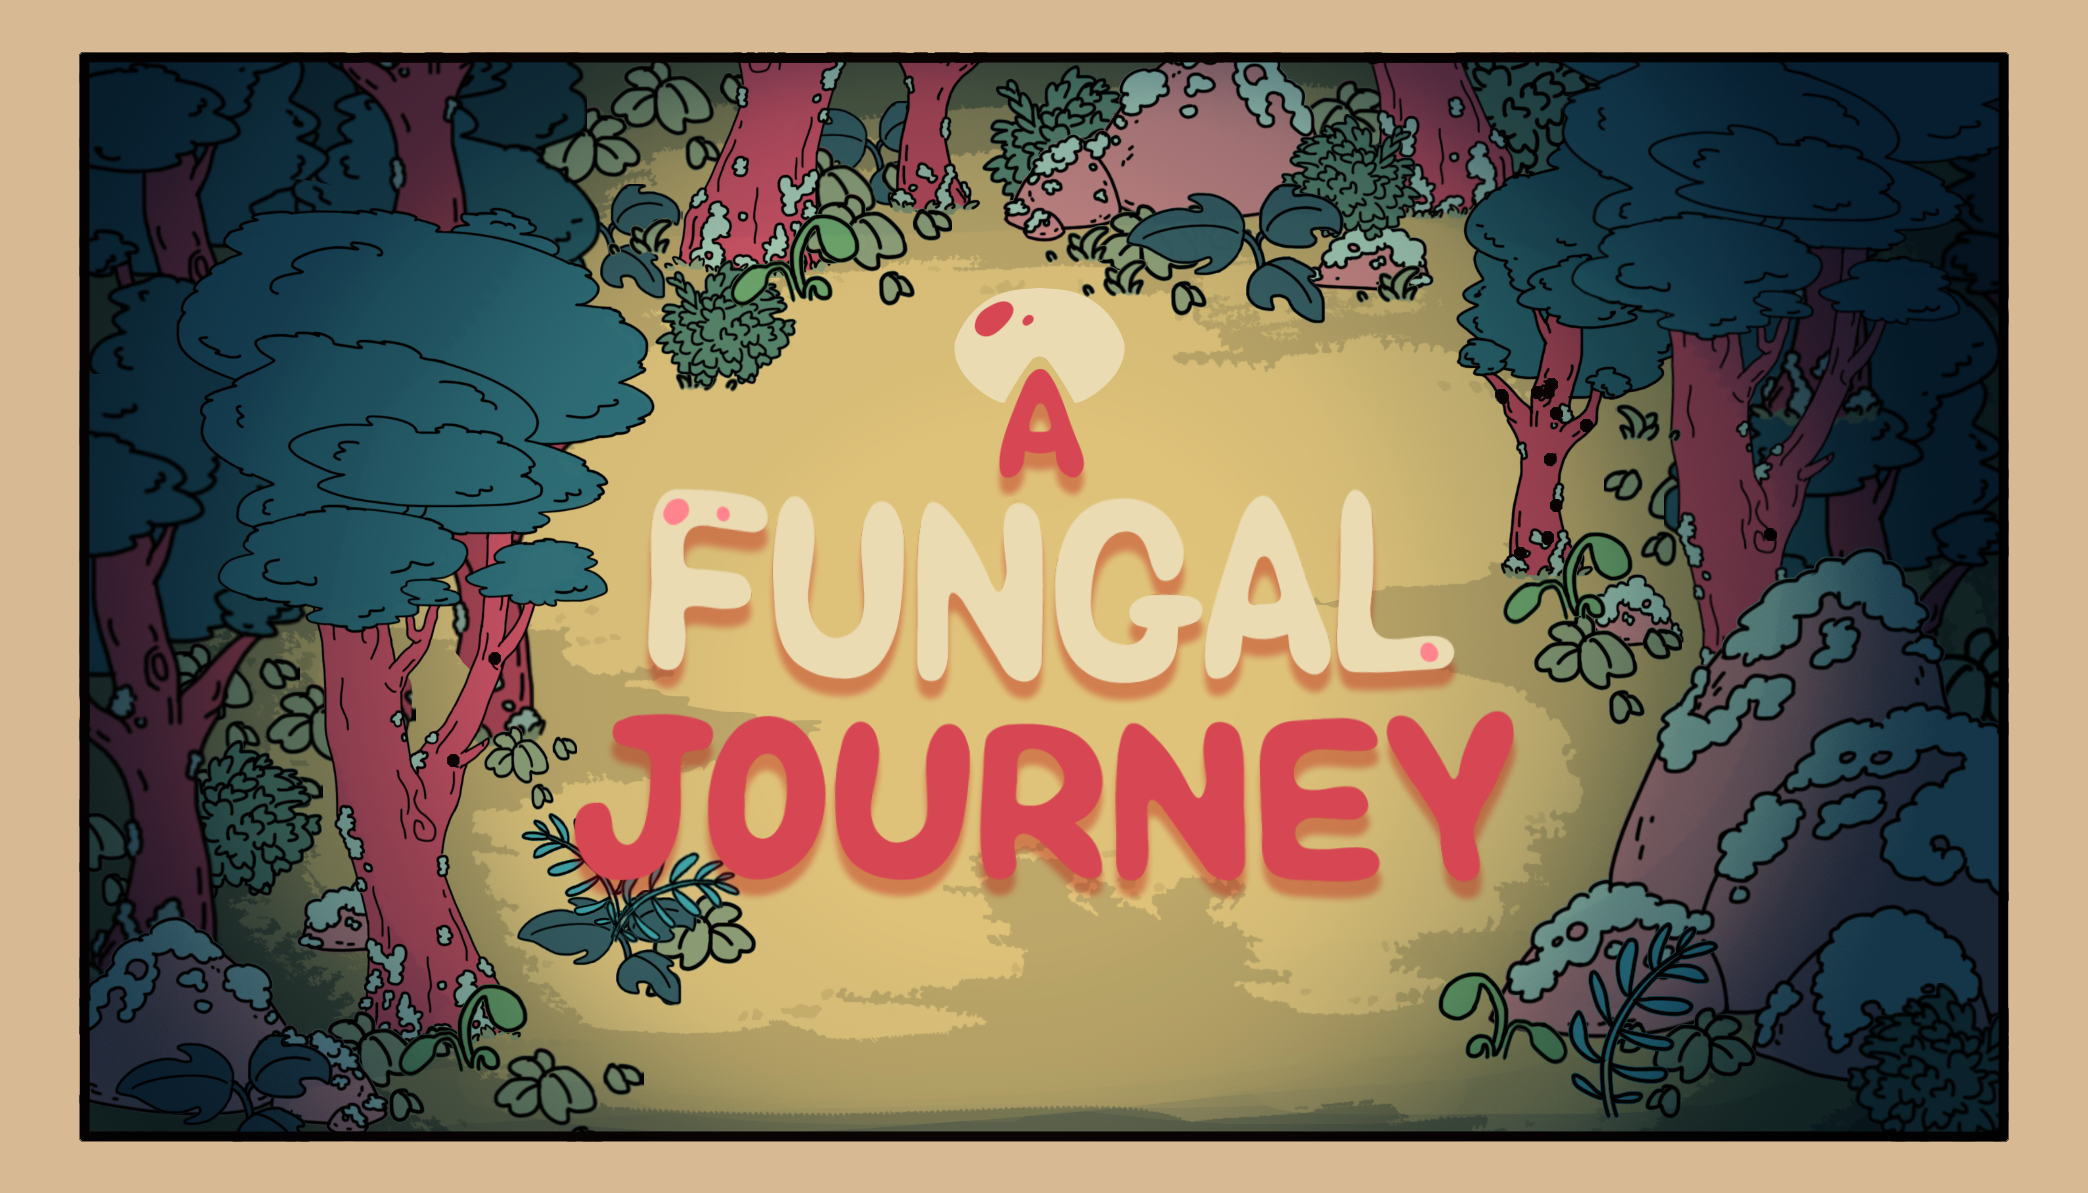 A Fungal Journey